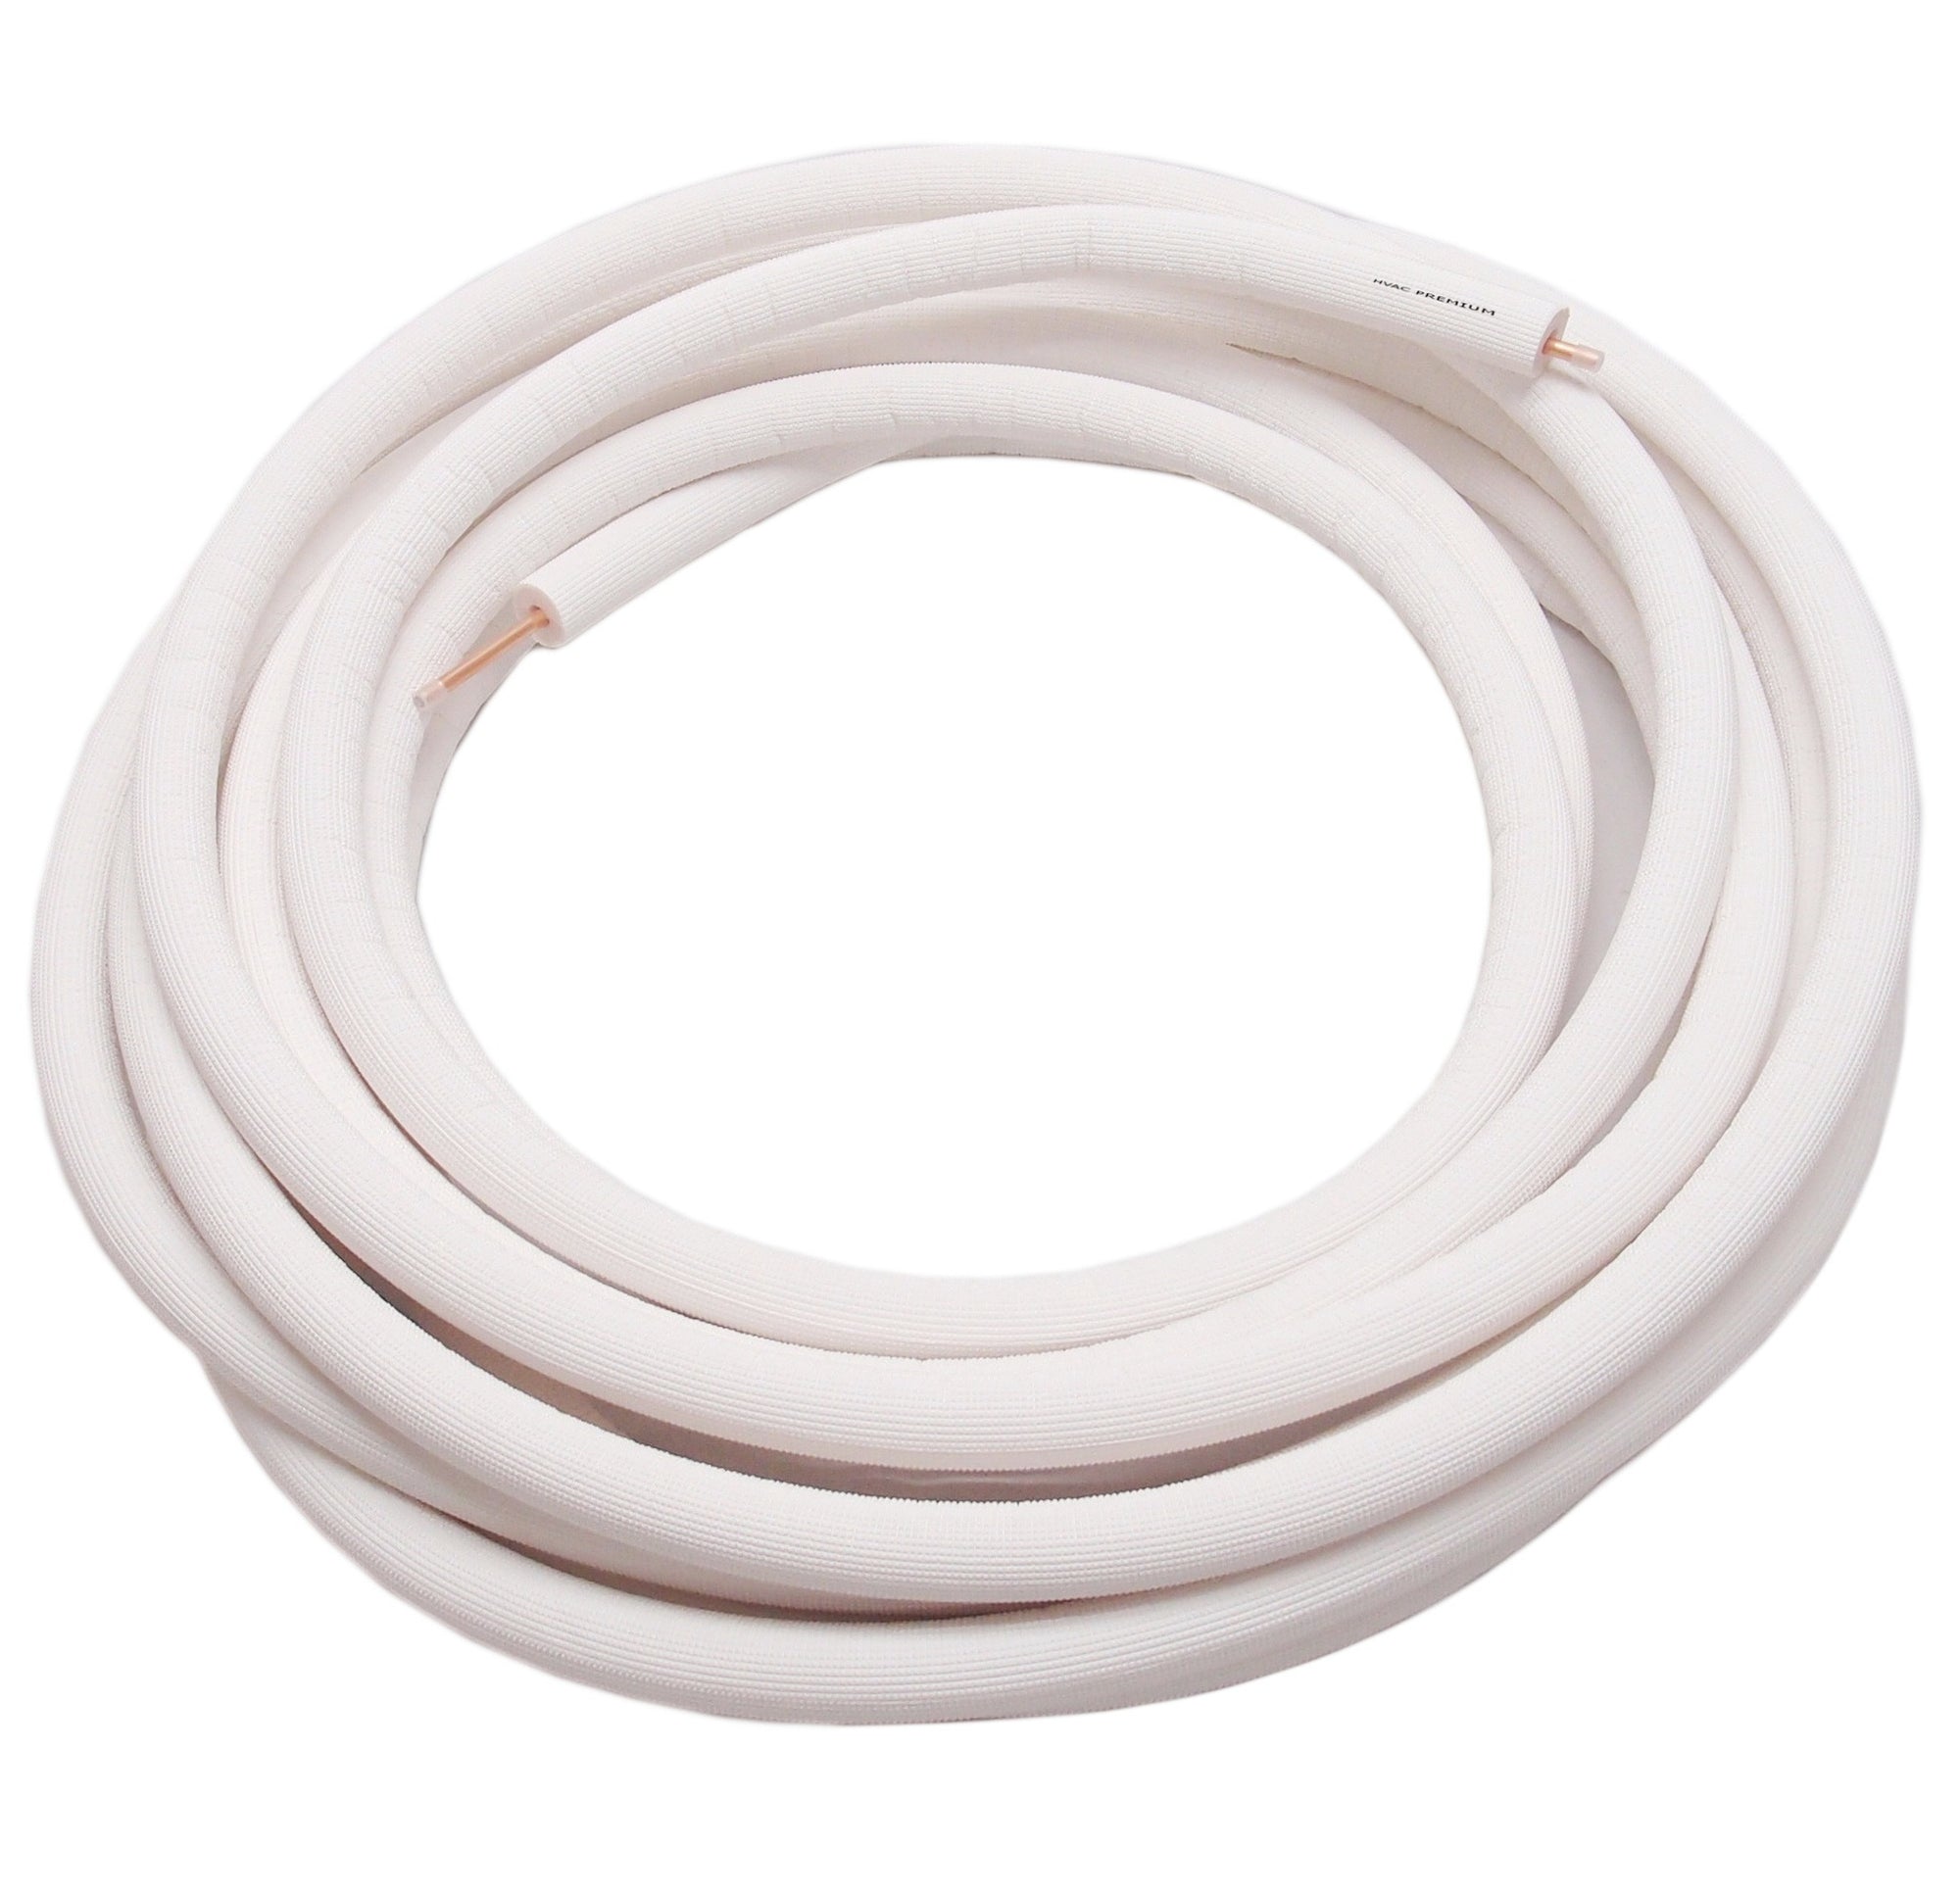 3/4" Insulated Copper Coil Line - Seamless Pipe Tube for HVAC, Refrigerant - 1/2" White Insulation - 15' Long